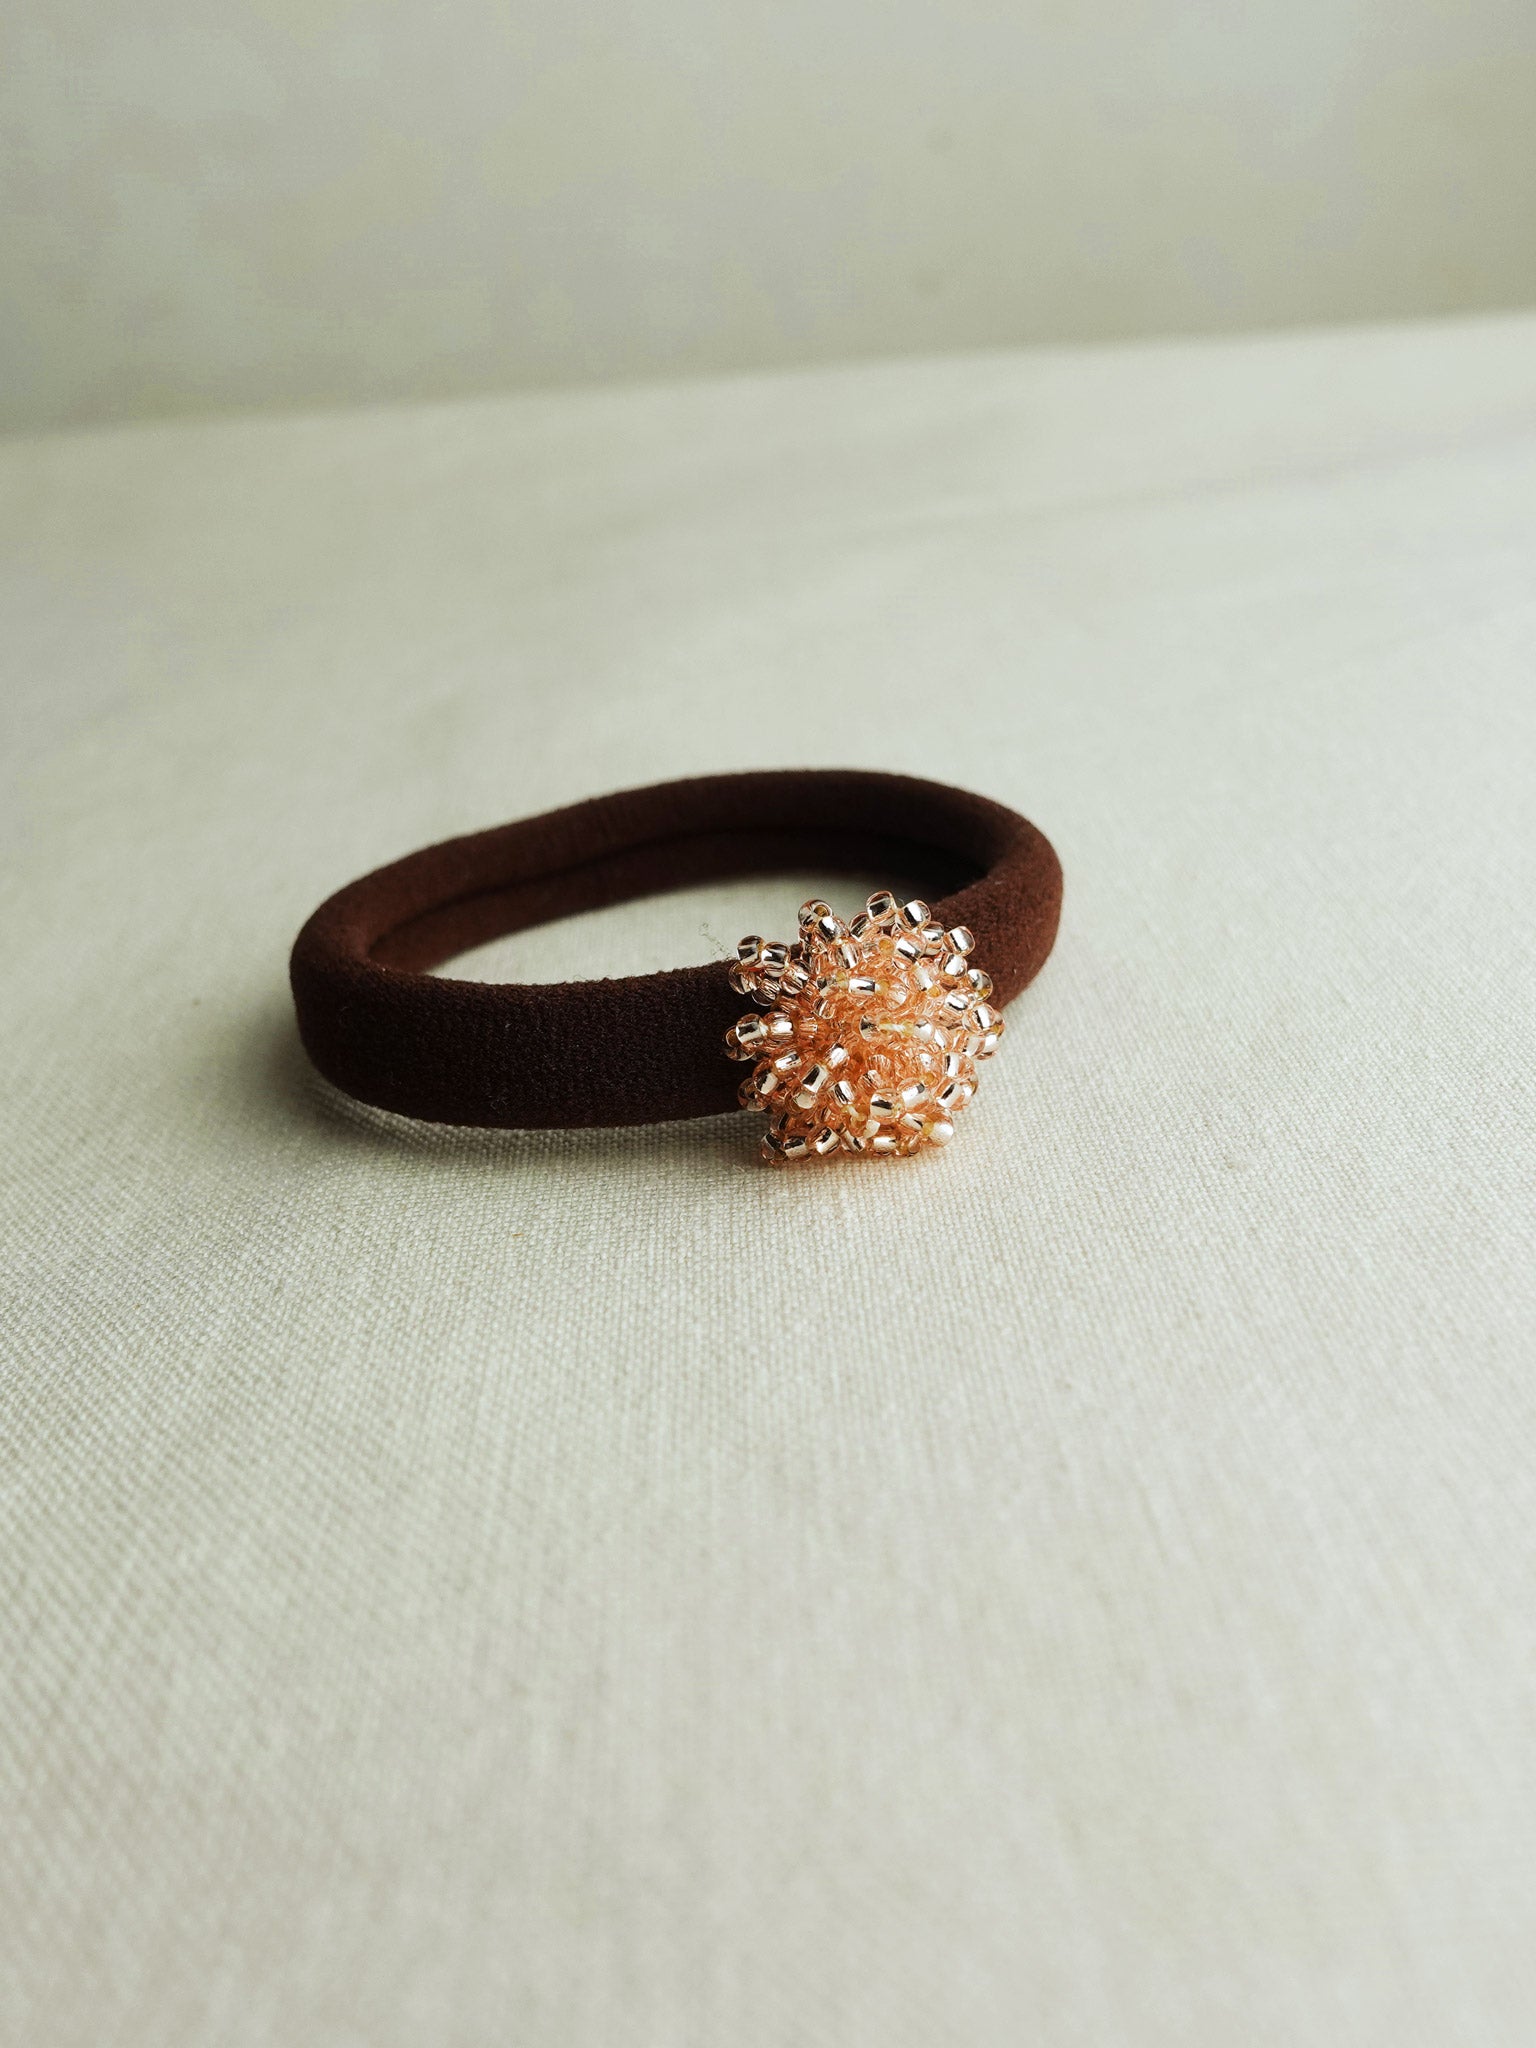 Fluffy Hair Tie in Champagne Pink Left